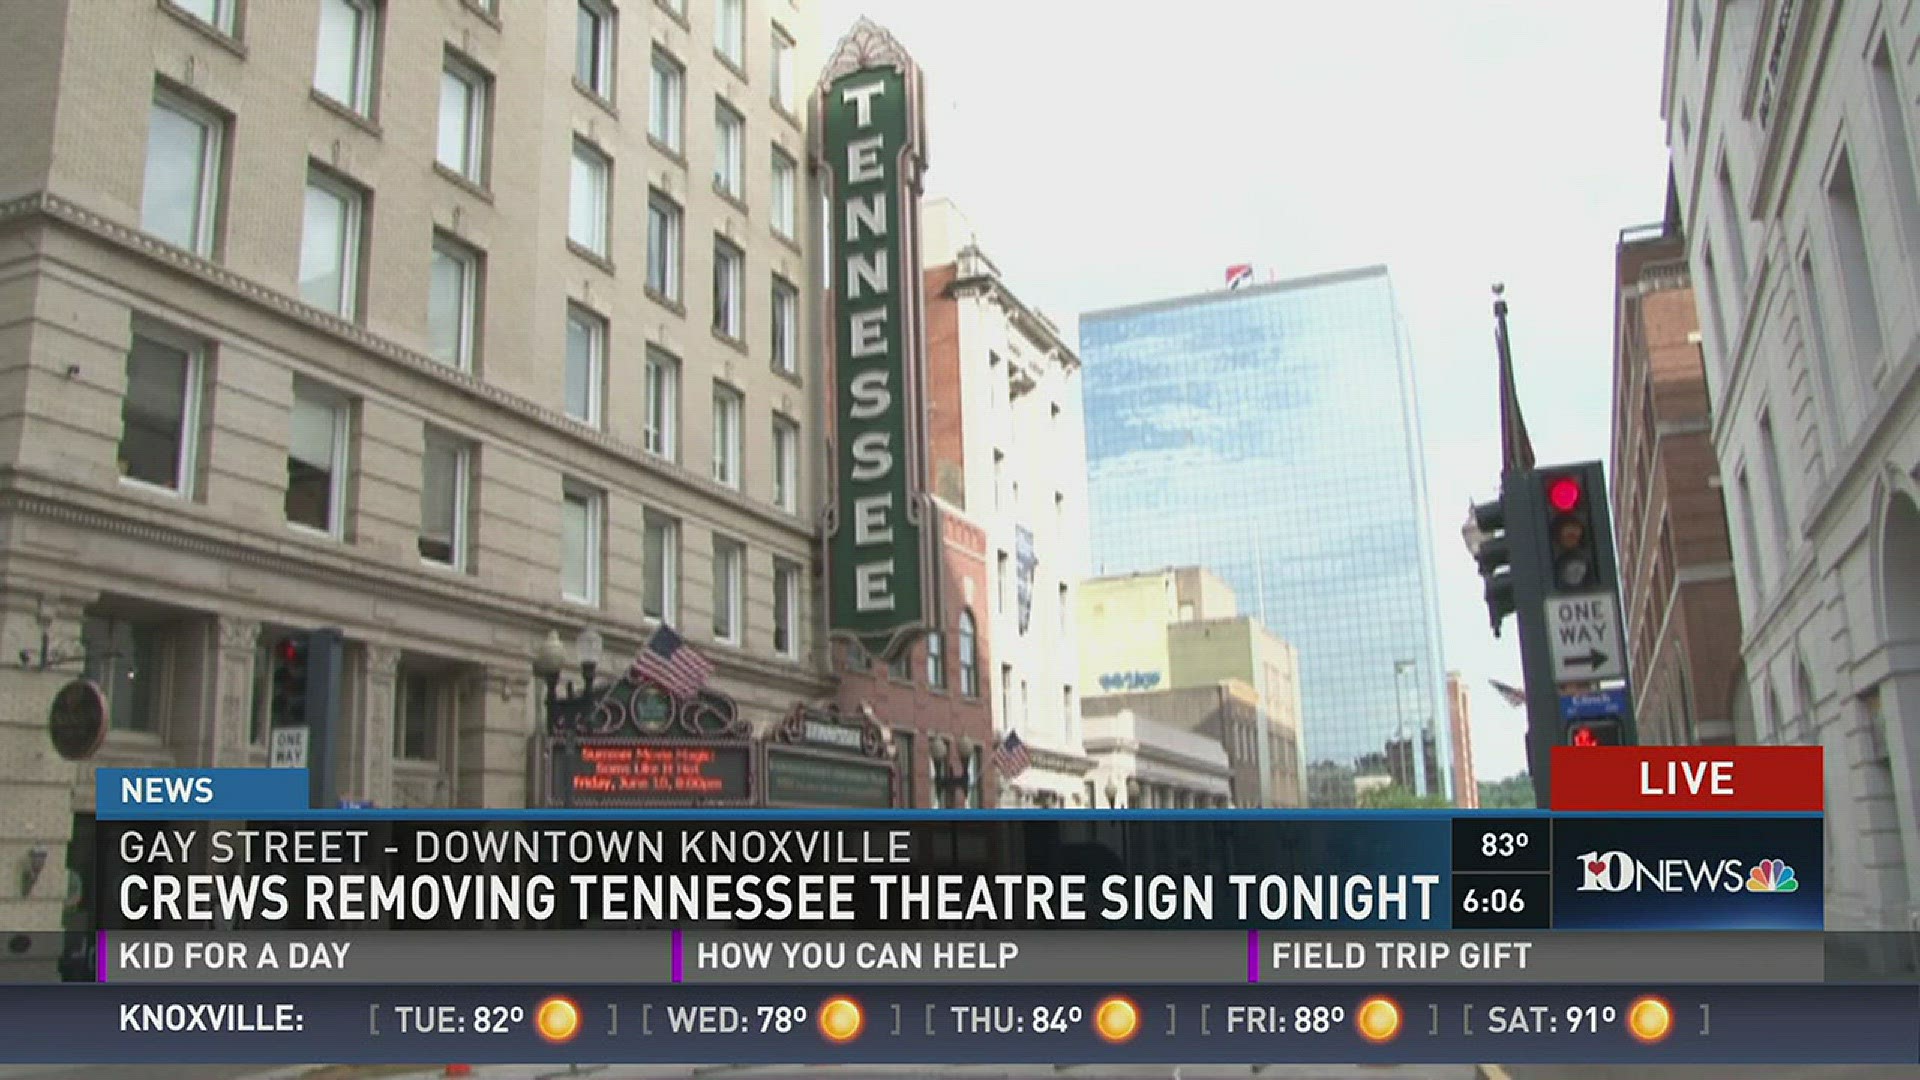 Tennessee Theatre sign is being taken down tonight, and sent away for six to eight weeks for some lighting upgrades